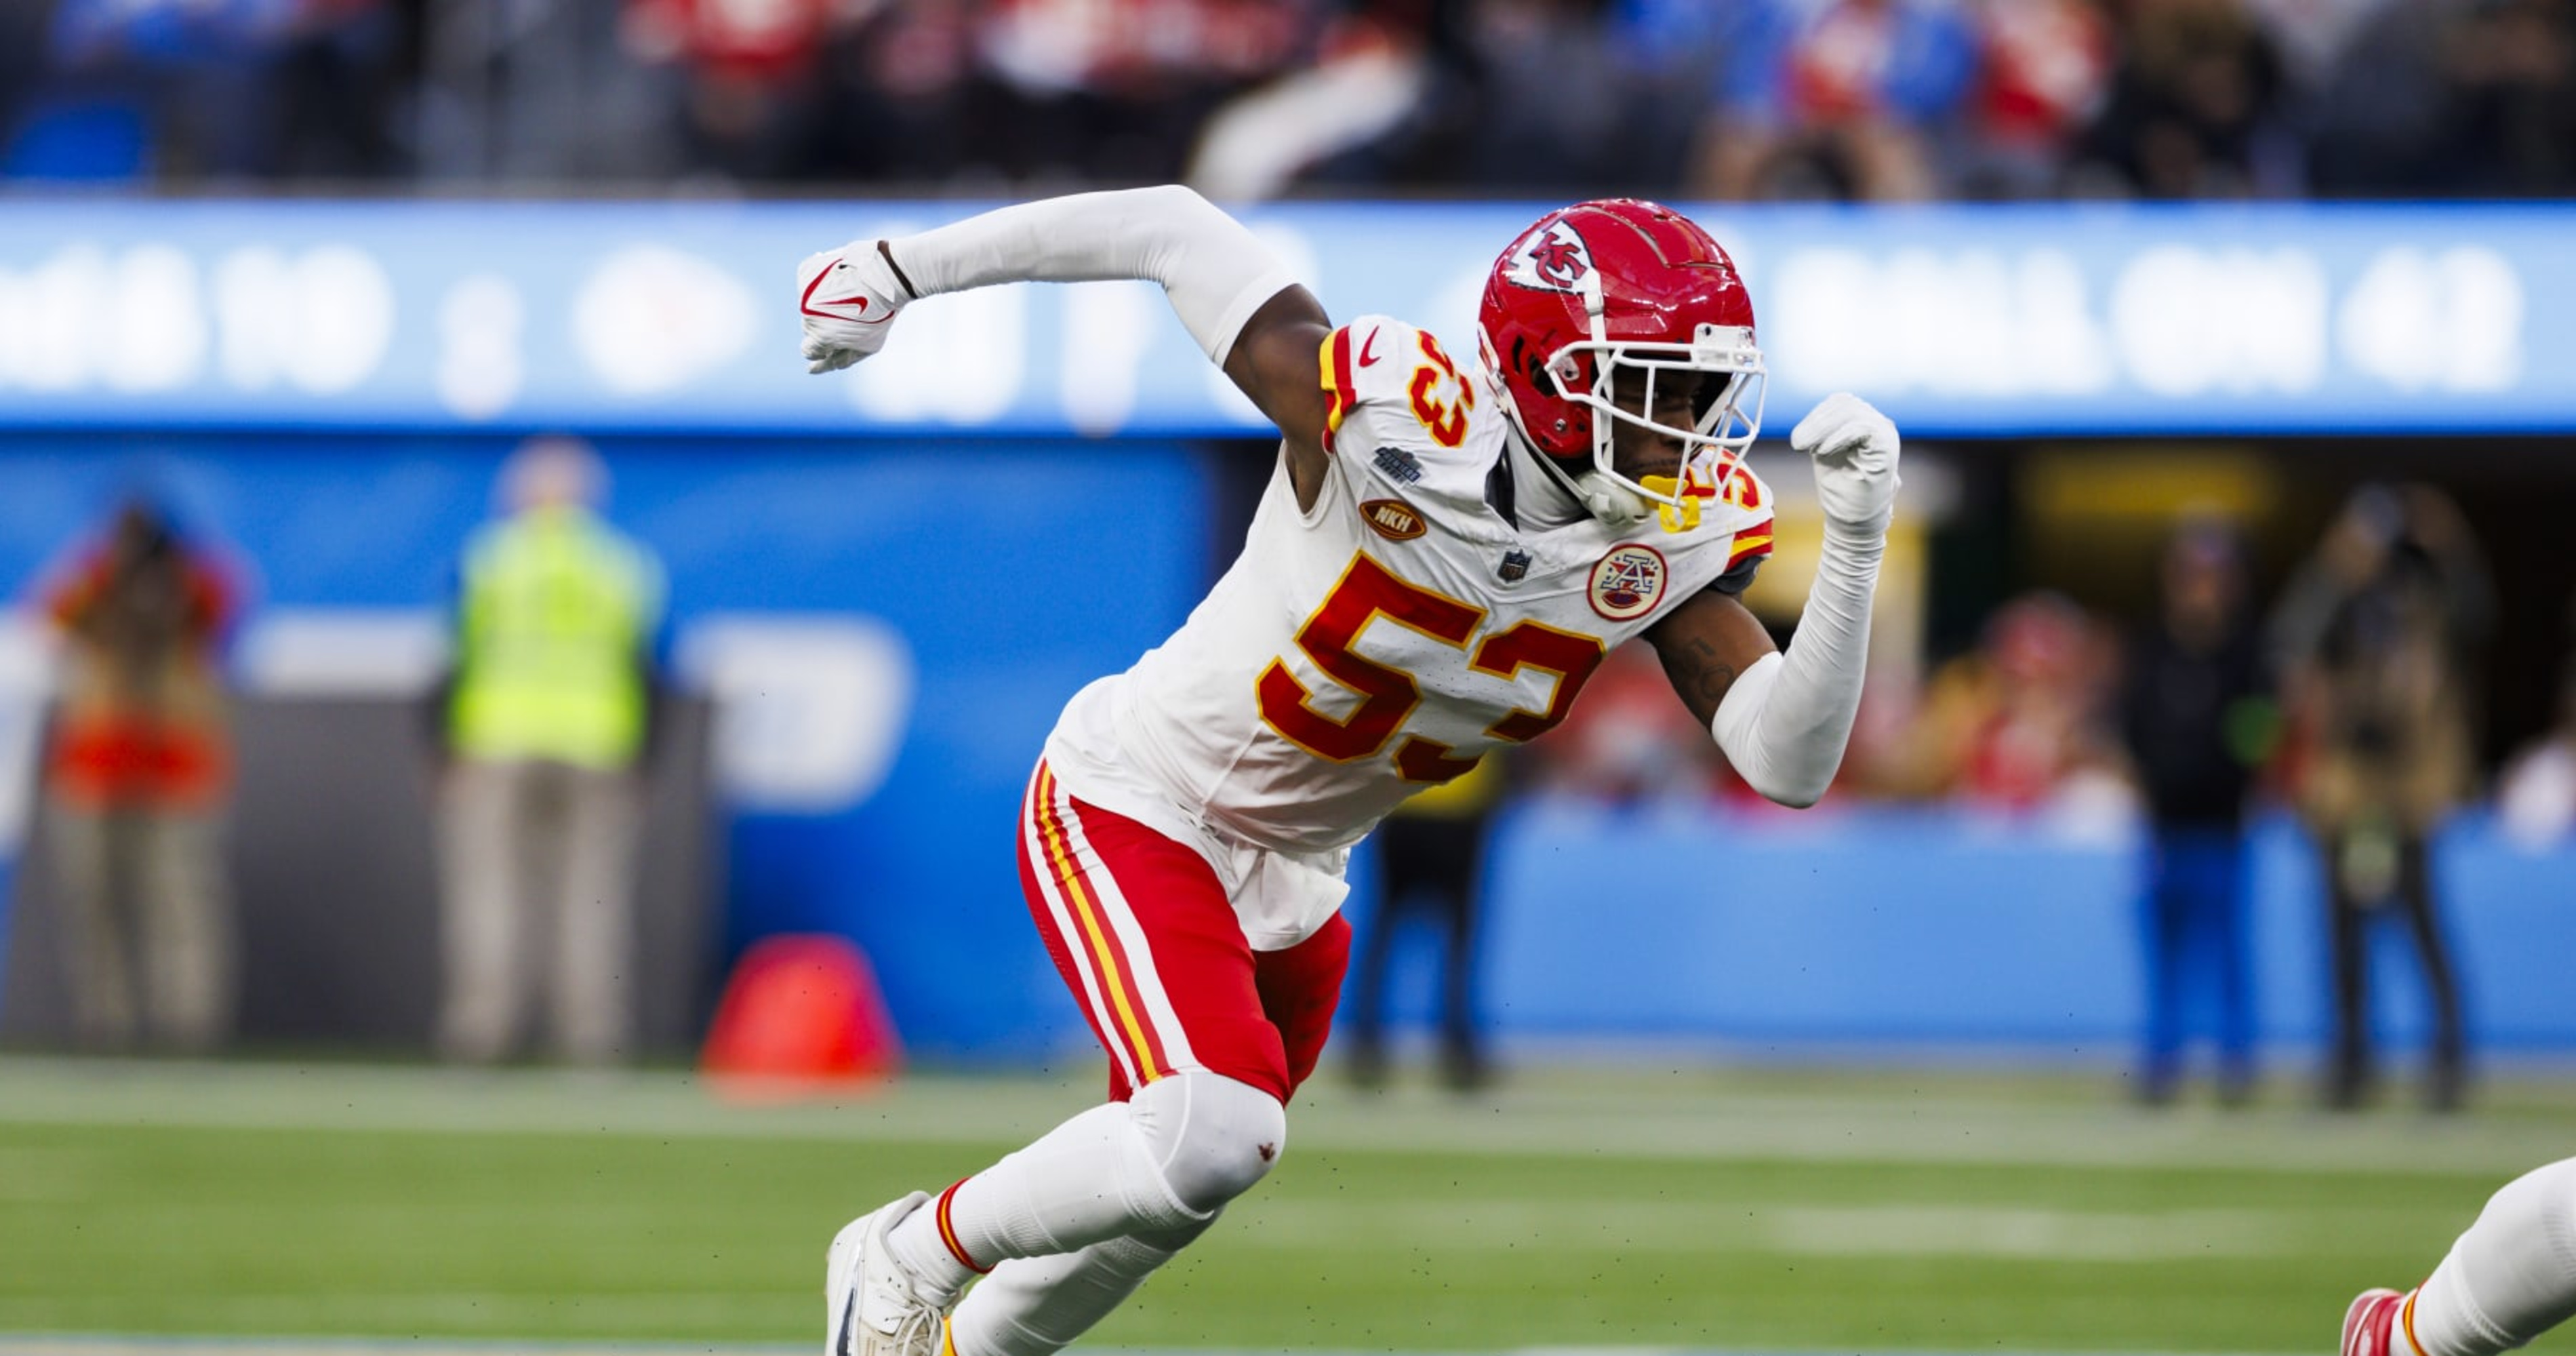 Chiefs' BJ Thompson Released from Hospital 4 Days After Suffering Cardiac Arrest